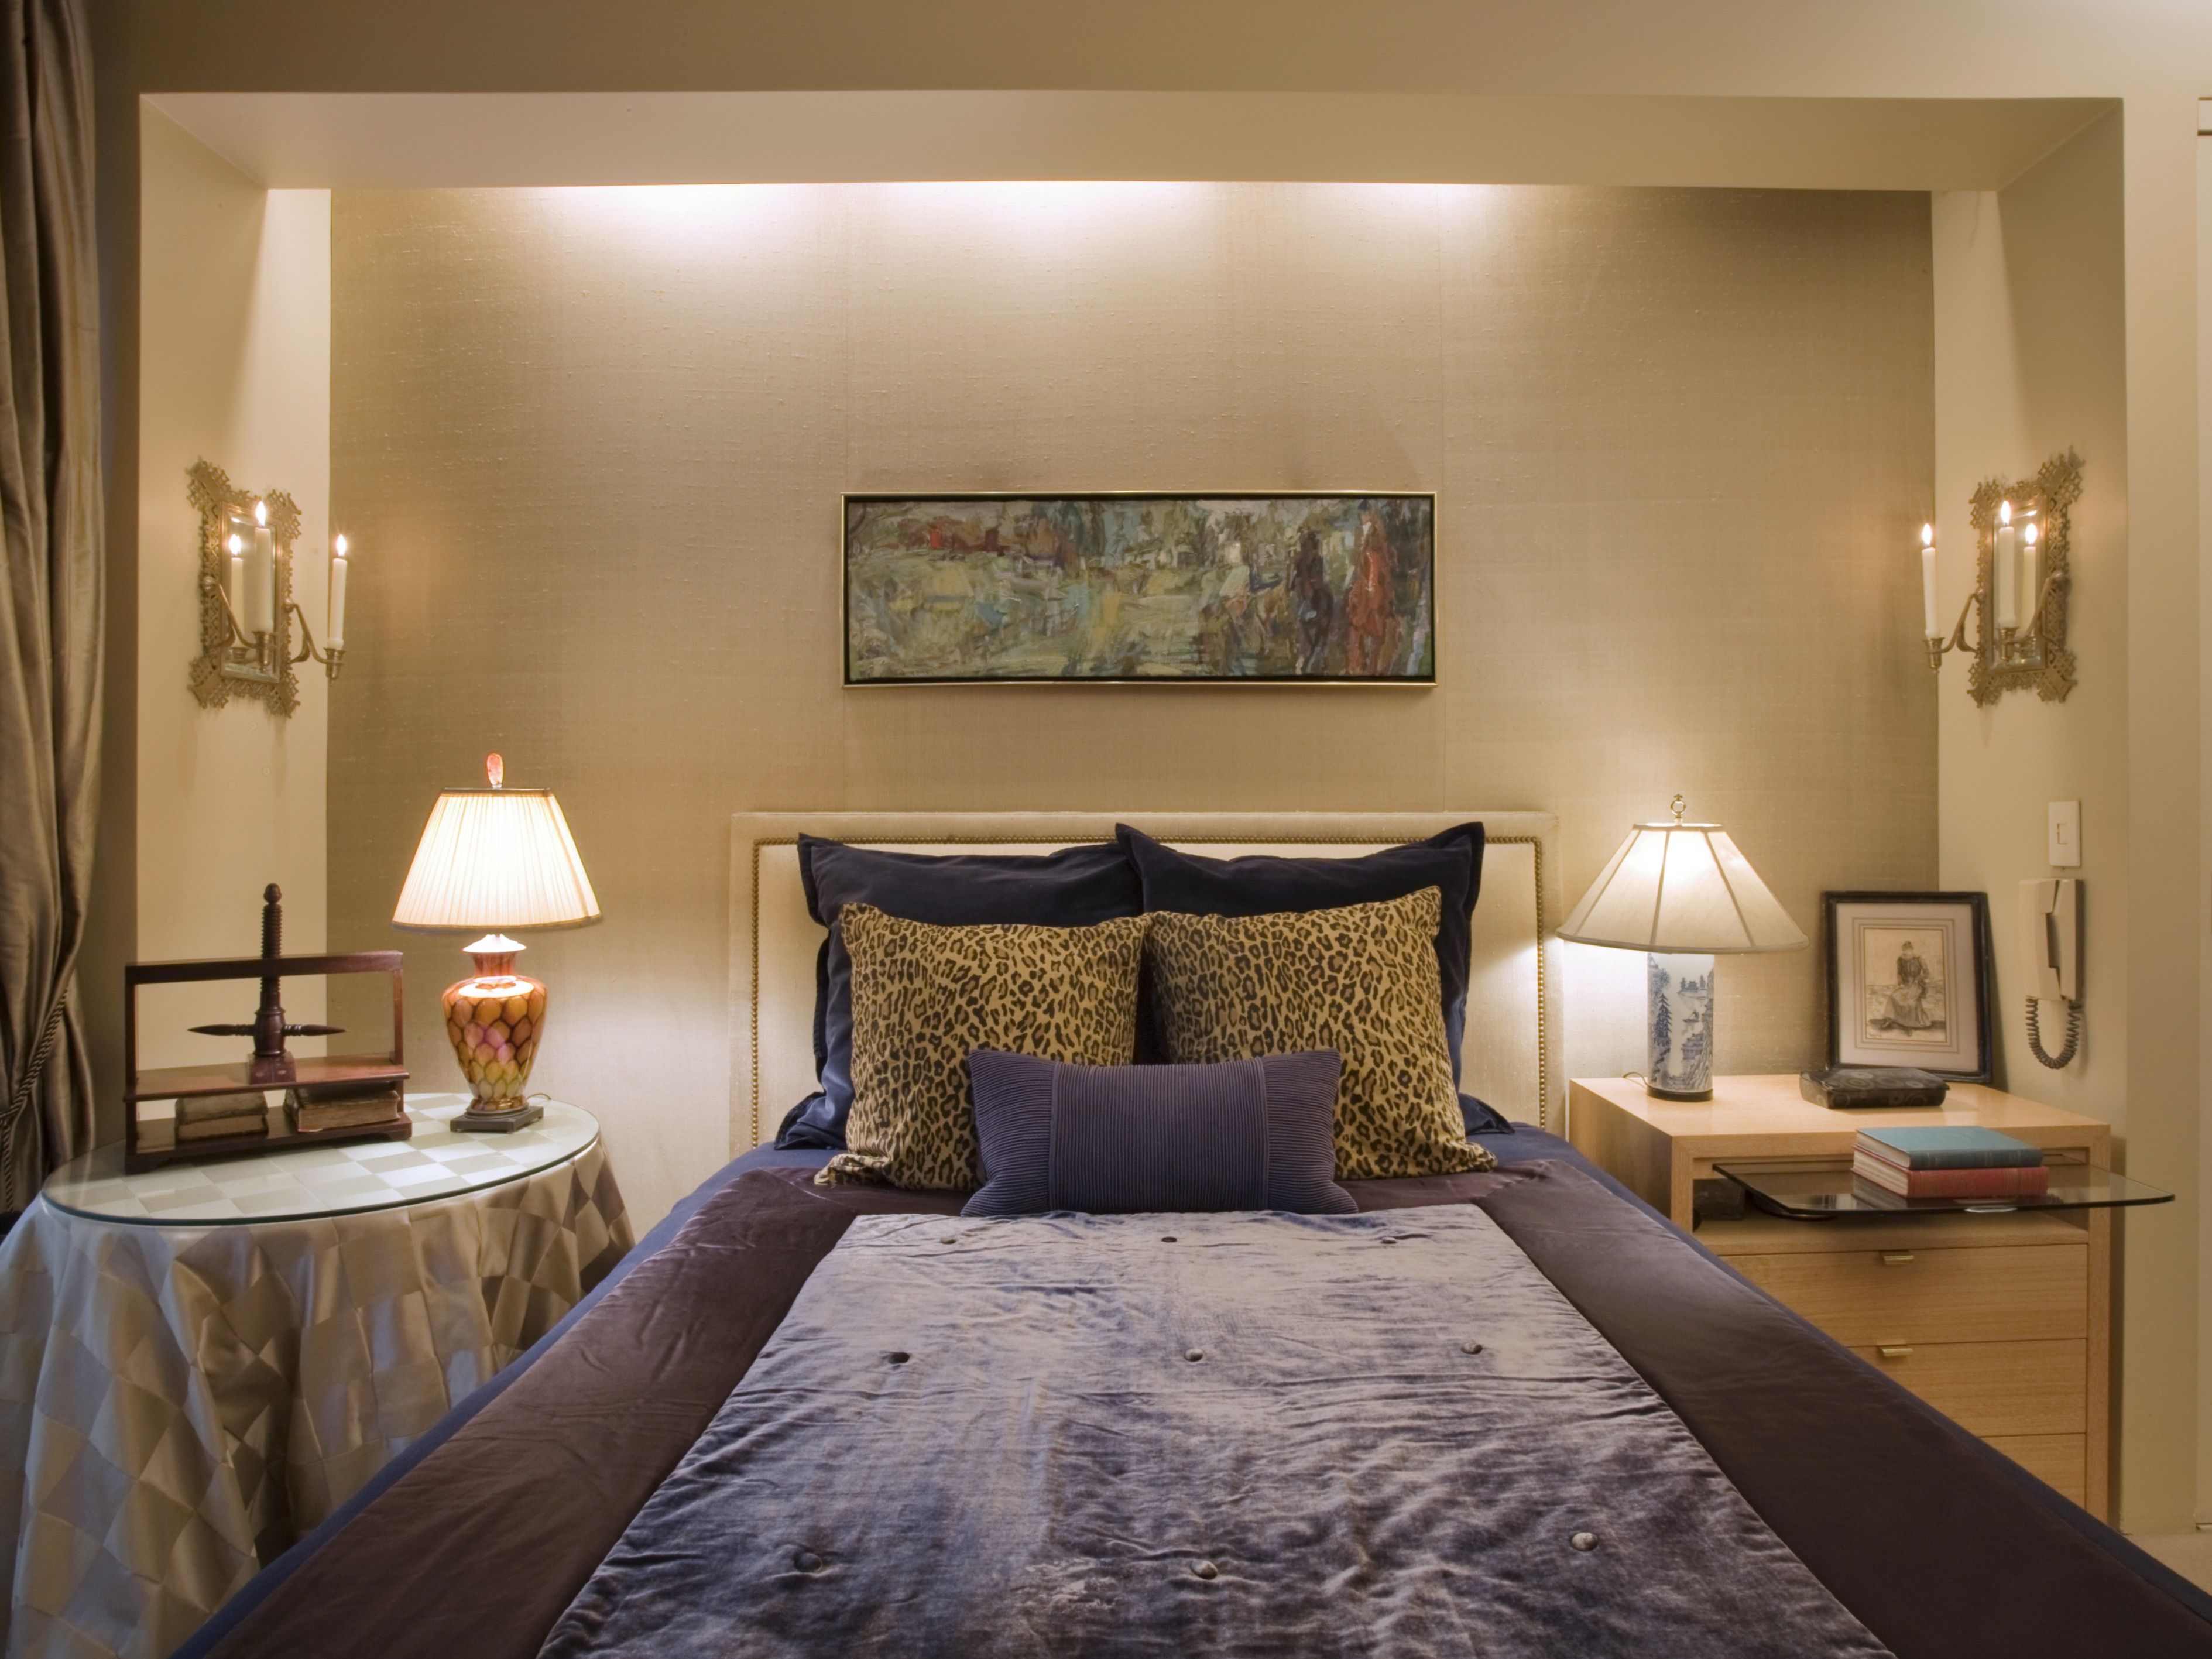 Bedroom Lighting For Romantic Nuance (View 14 of 18)